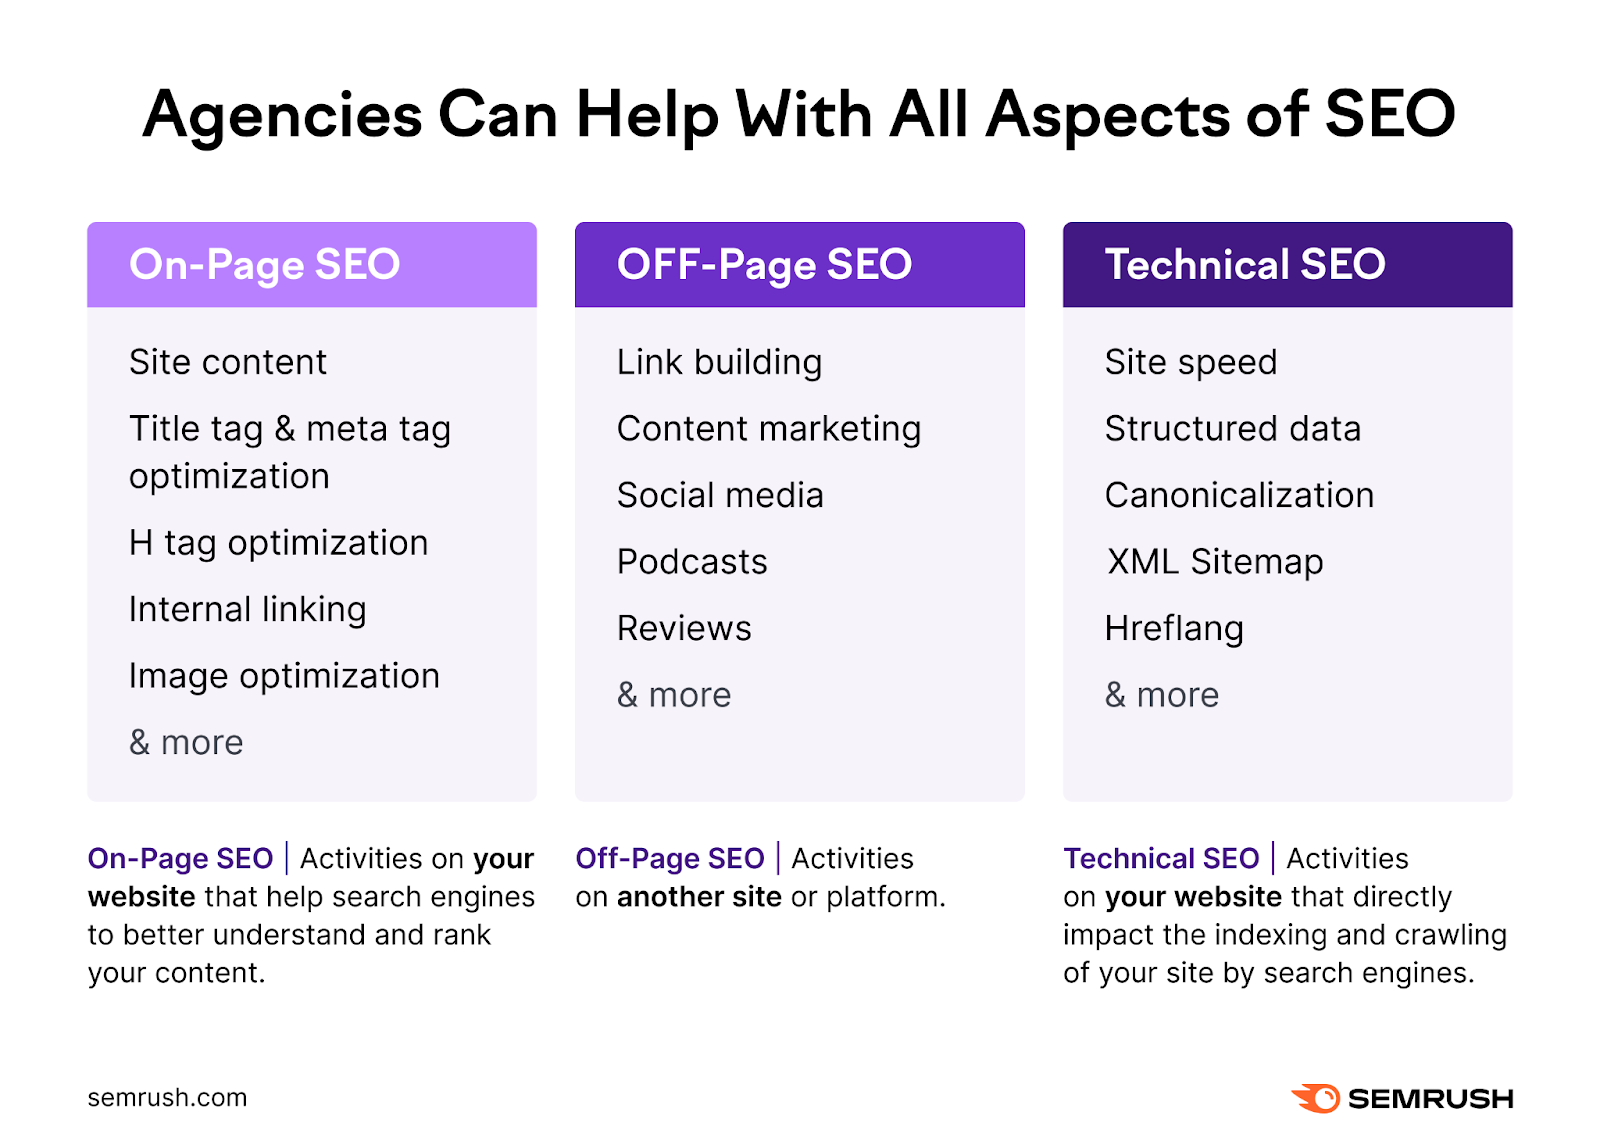 Agencies can help with all aspects of SEO, including on-page SEO, off-page SEO and technical SEO